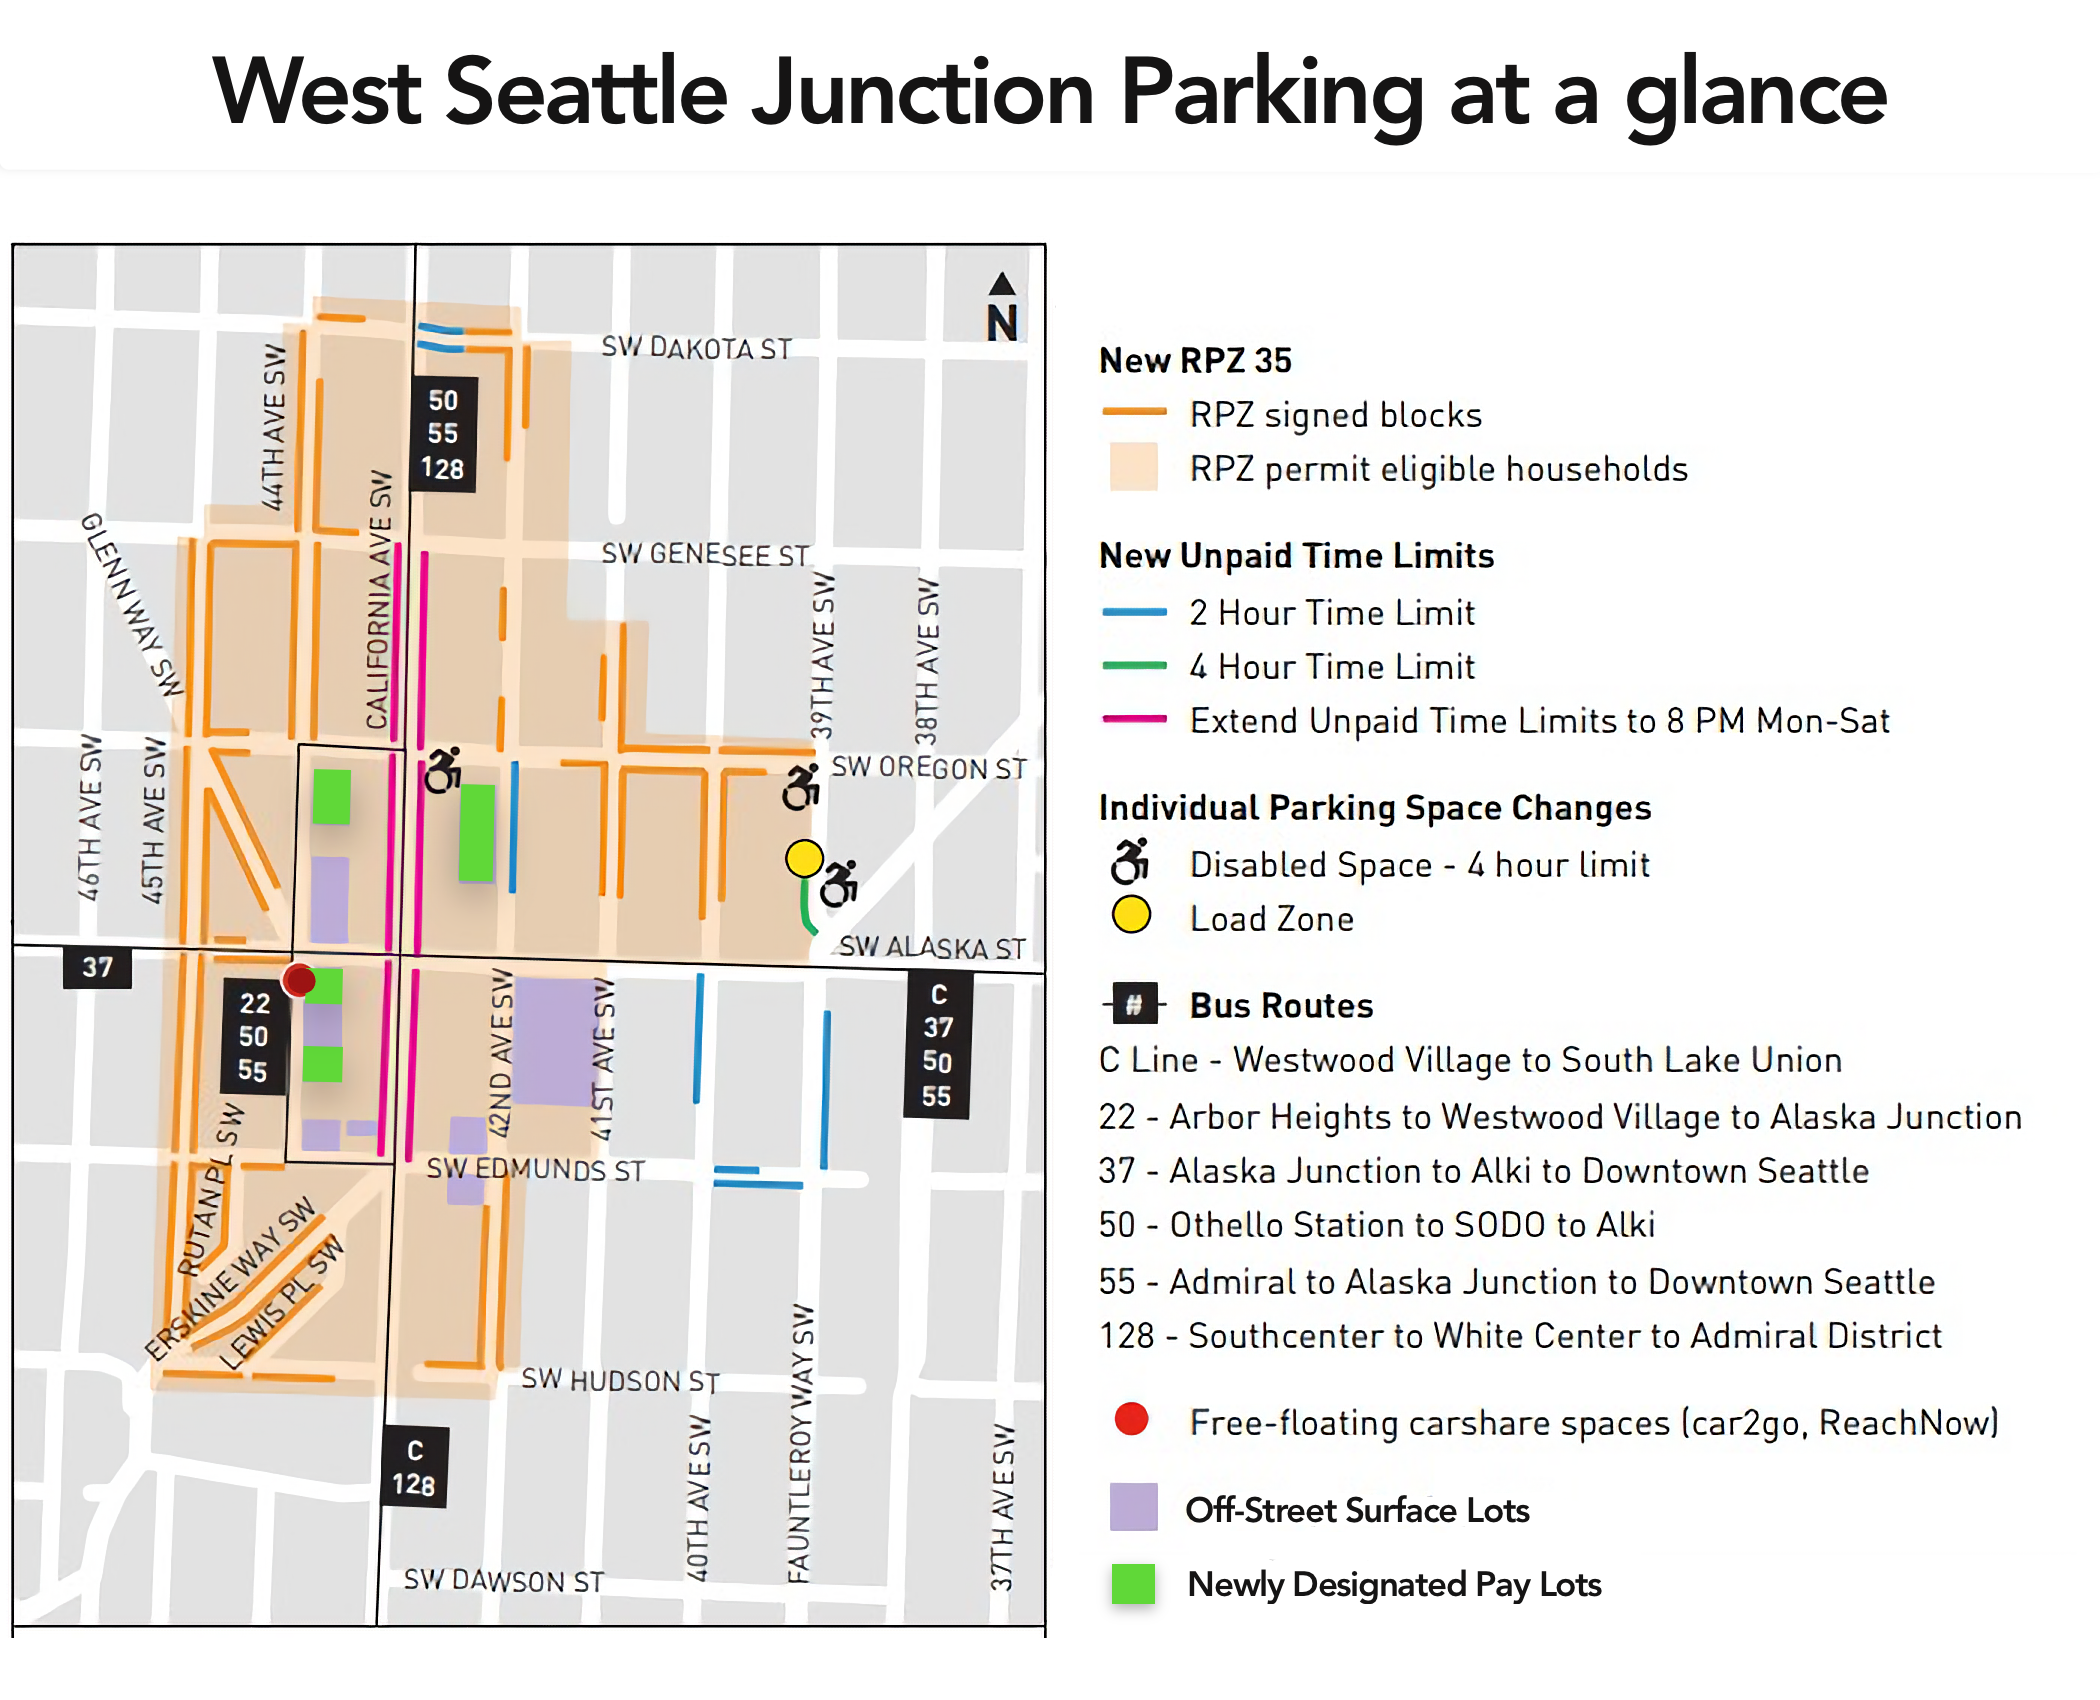 Junction parking at a glance